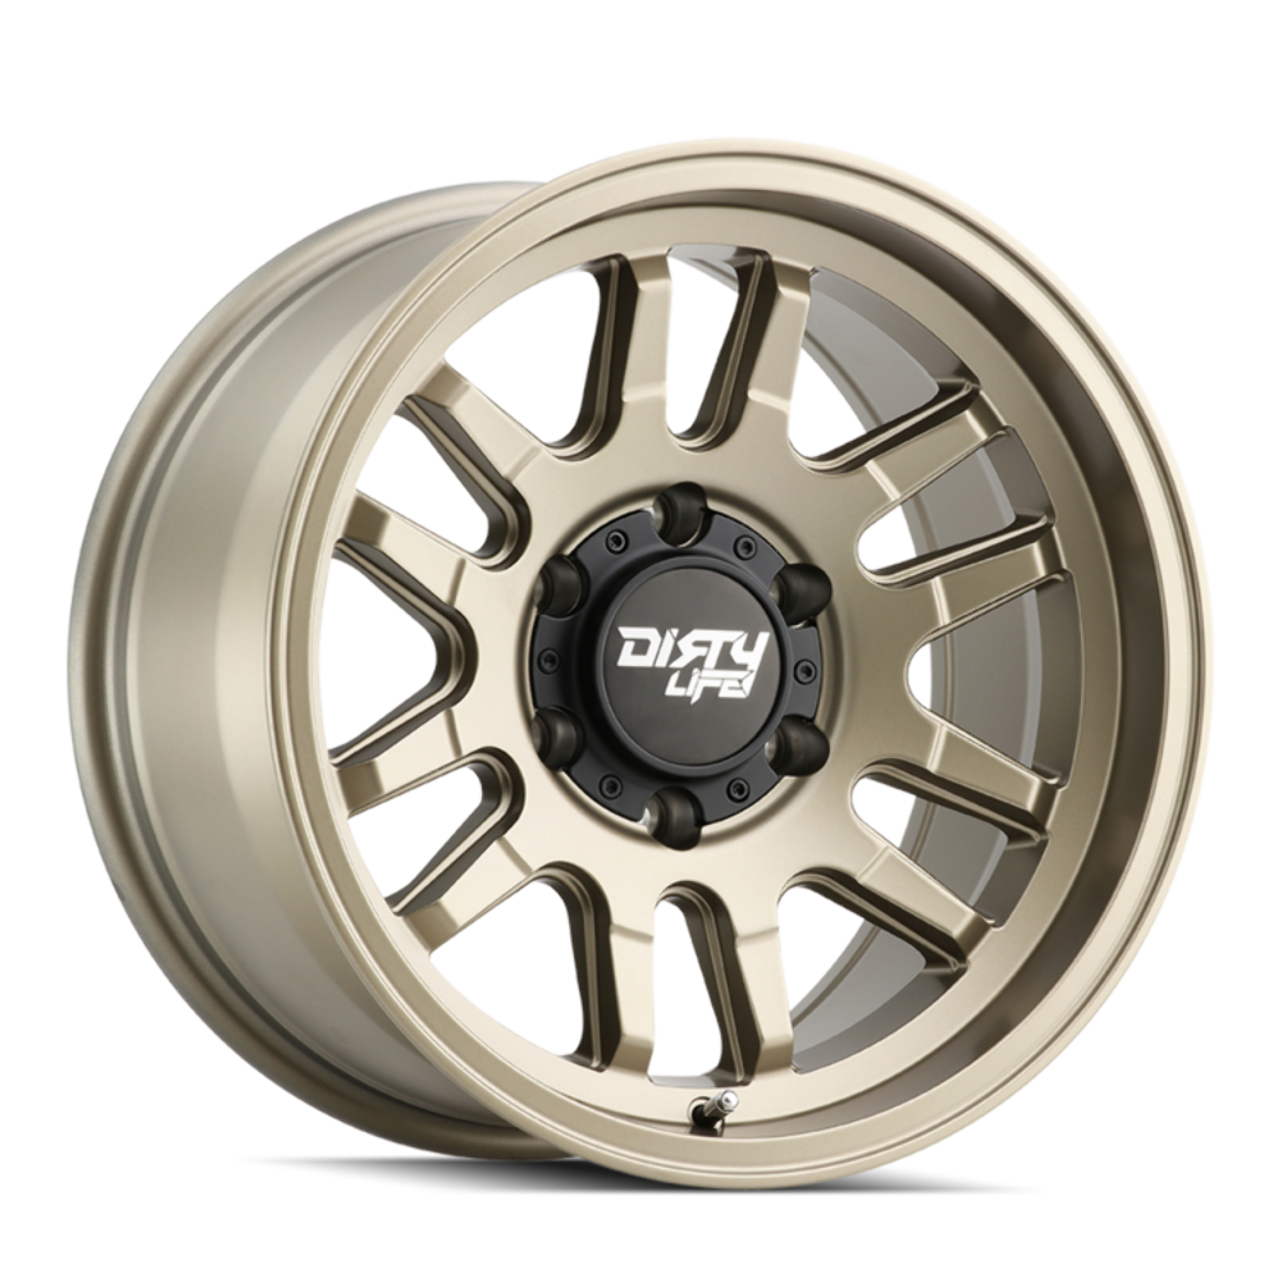 Set 4 17" Dirty Life Canyon 17x9 Satin Gold 6x135 0mm For Ford Lincoln Wheels